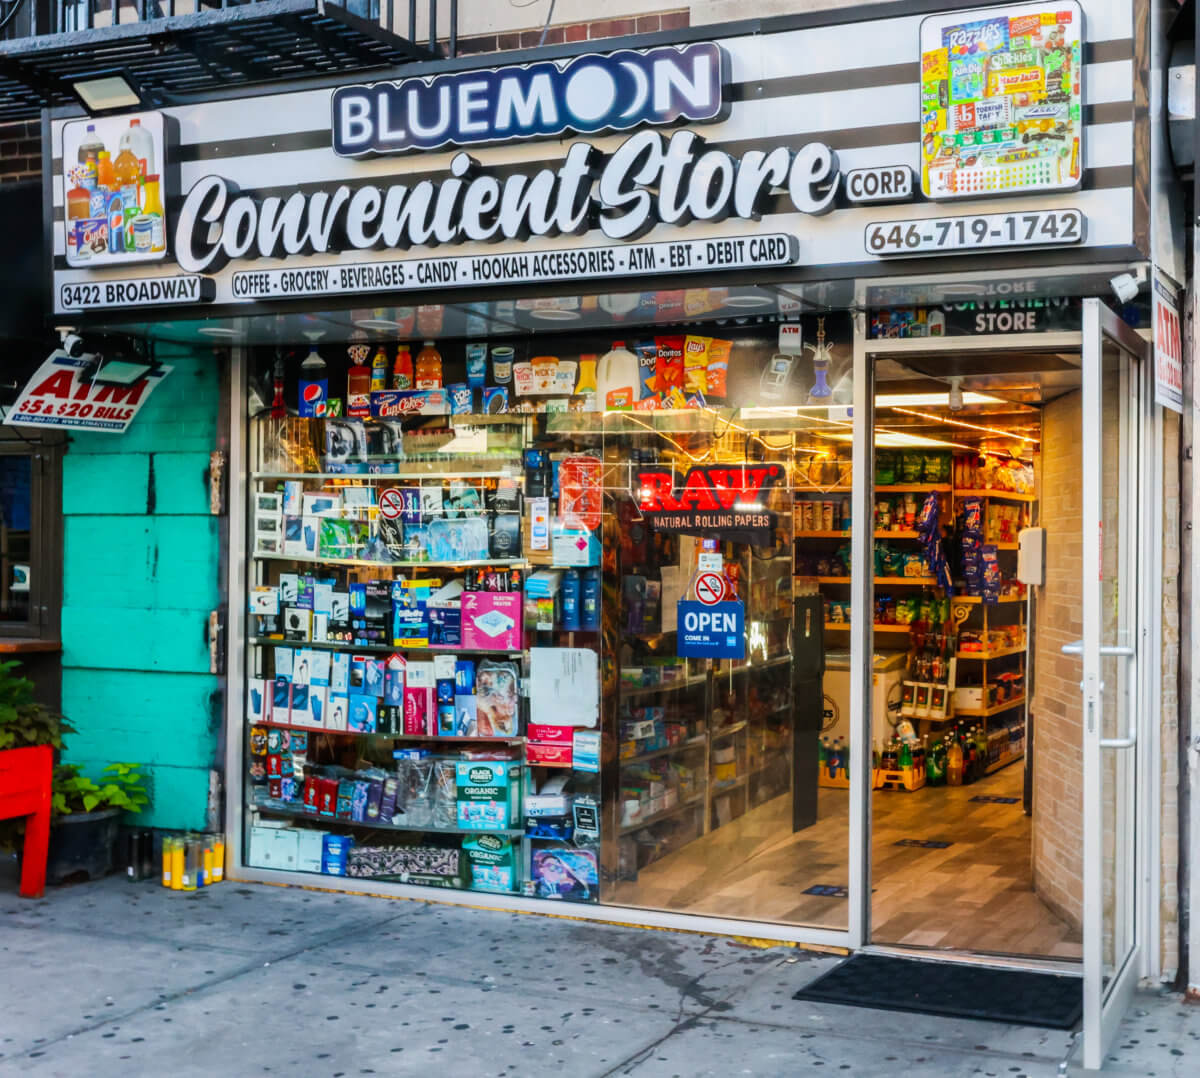 The Blue Moon Convenient Store in Harlem where the stabbing of Austin Simon occurred on July 1, 2022.